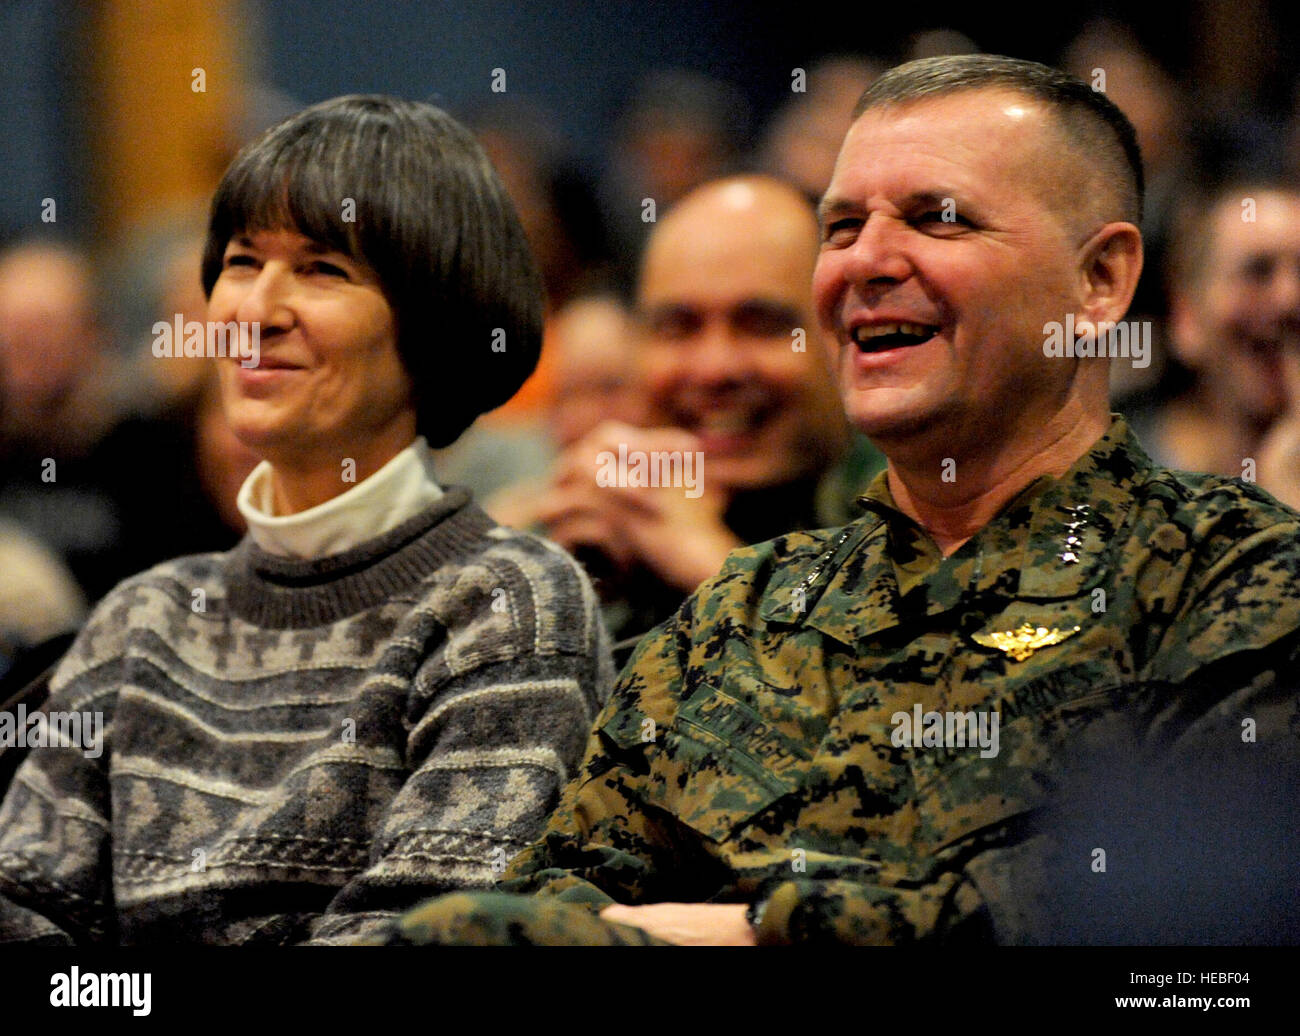 Vice Chairman of the Joint Chiefs of Staff U.S. Marine Gen. James E. Cartwright and his wife, Sandee, laugh during a USO performance at Eielson Air Force Base, Alaska, Nov. 10, 2008. Cartwright is on an eight-day, five-country visit to see troops. DoD photo by Air Force Master Sgt. Adam M. Stump. (Released) Stock Photo